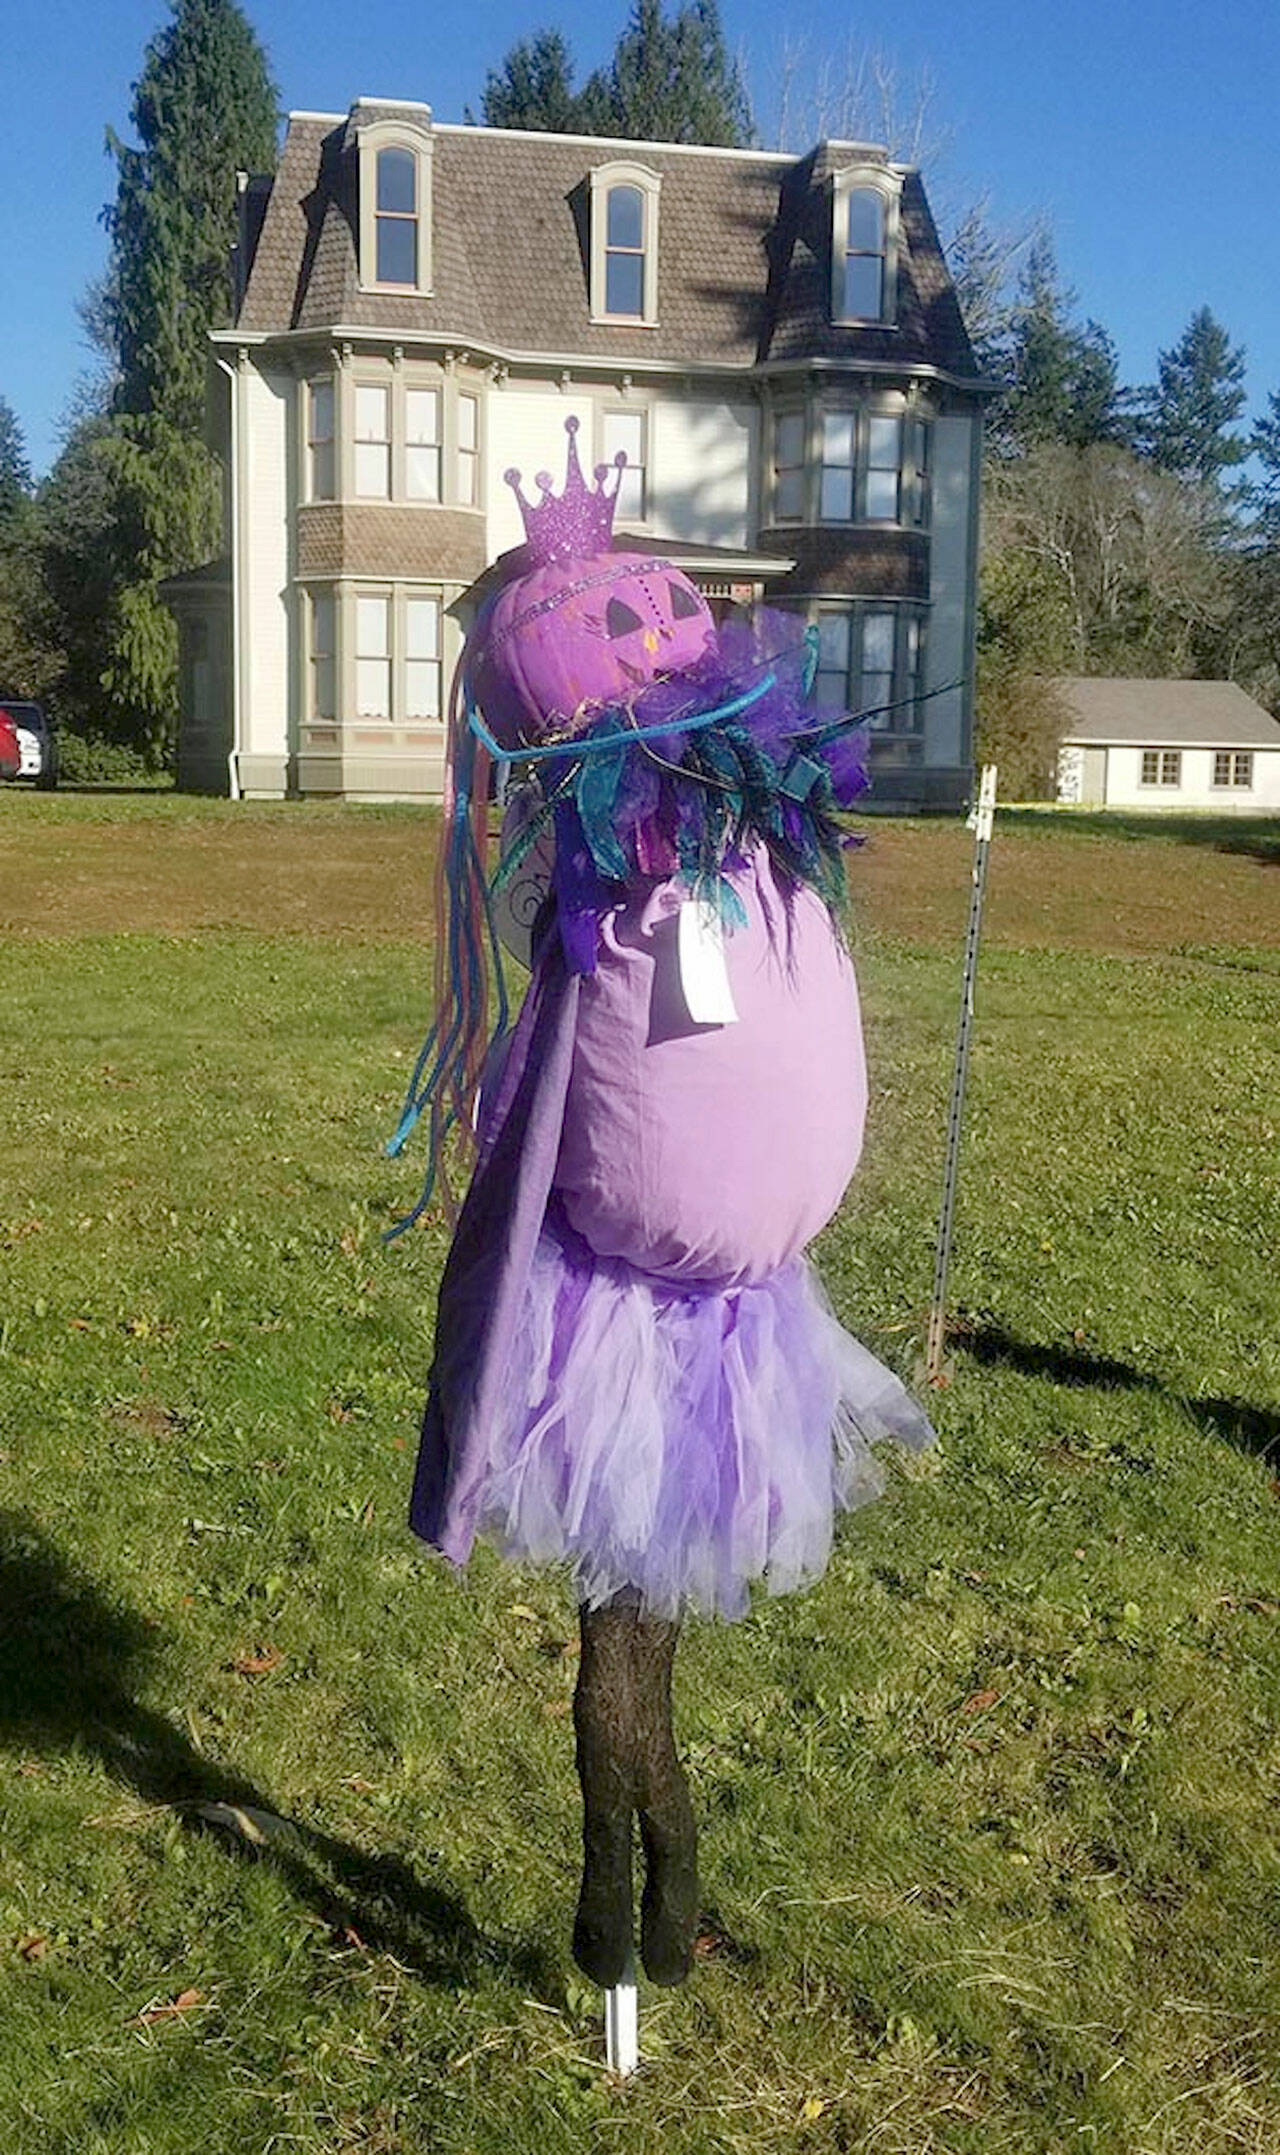 The “Purple Fairy,” constructed by Mia Mann’s third-grade class at Quilcene School, was among the winners of last year’s Scarecrow Contest at Quilcene’s Worthington Park. Signups for this November’s competition are underway now. (Worthington Park)